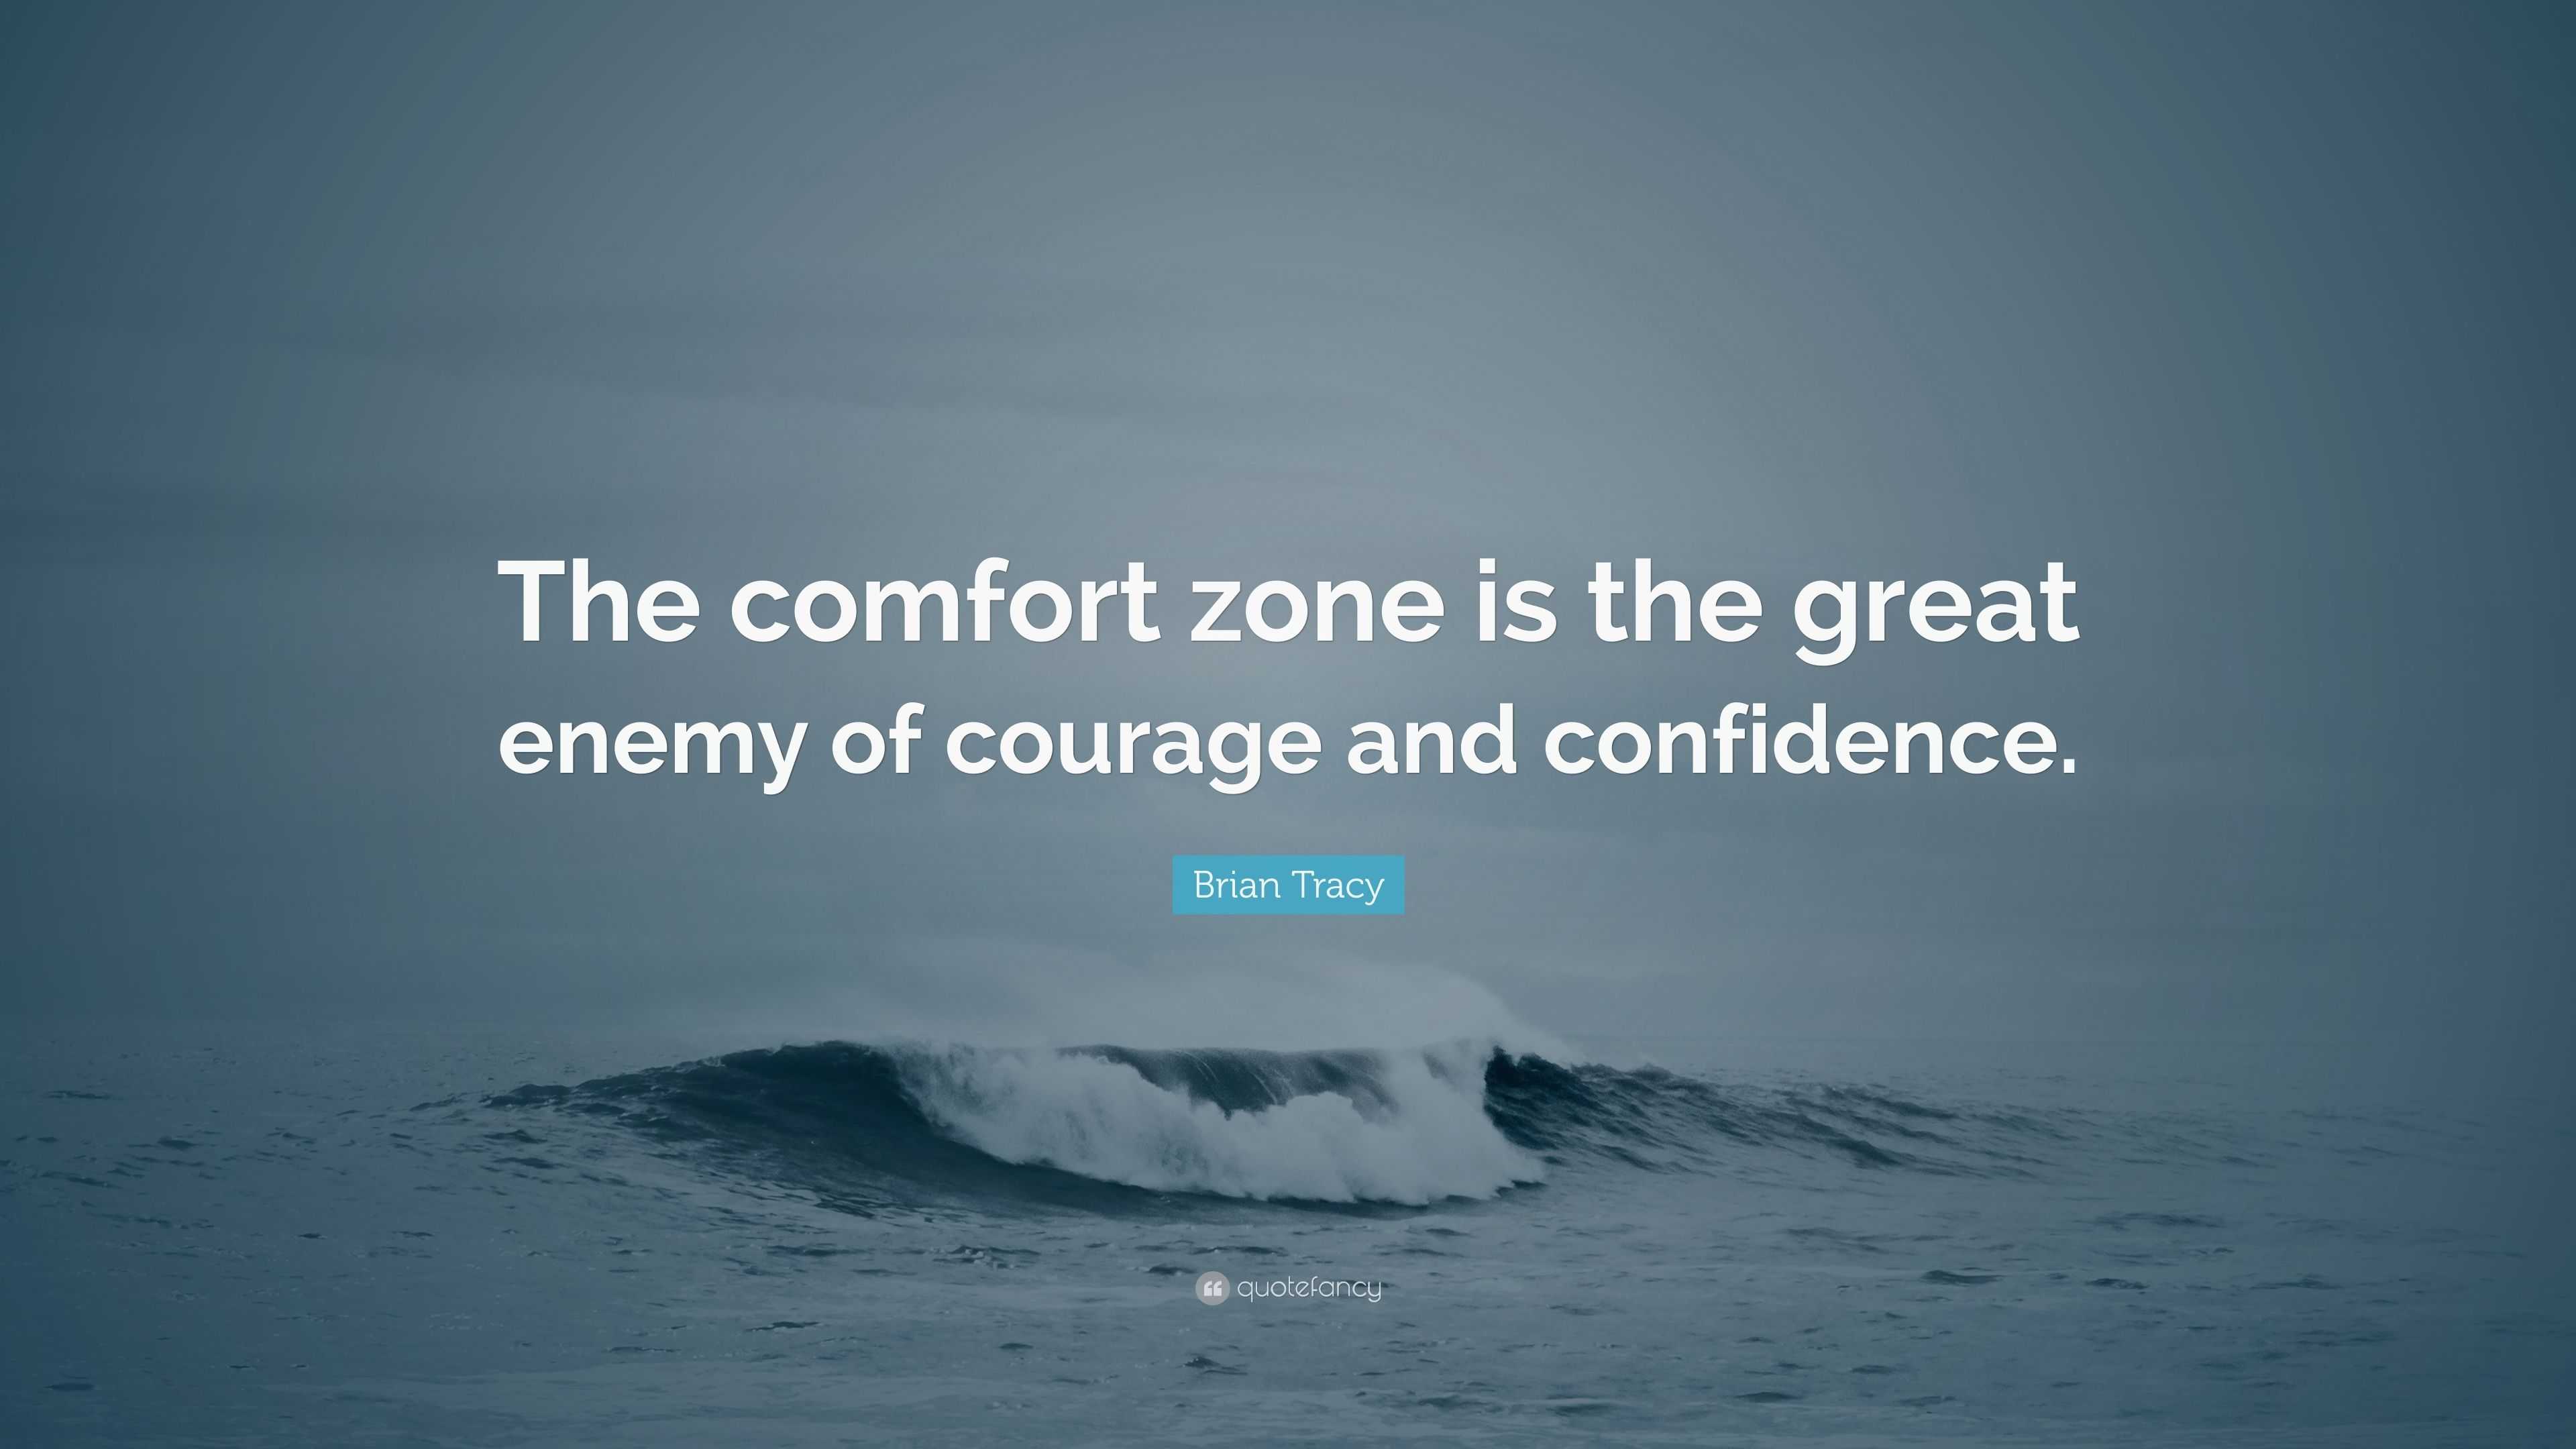 Brian Tracy Quote: “The comfort zone is the great enemy of courage and  confidence.”